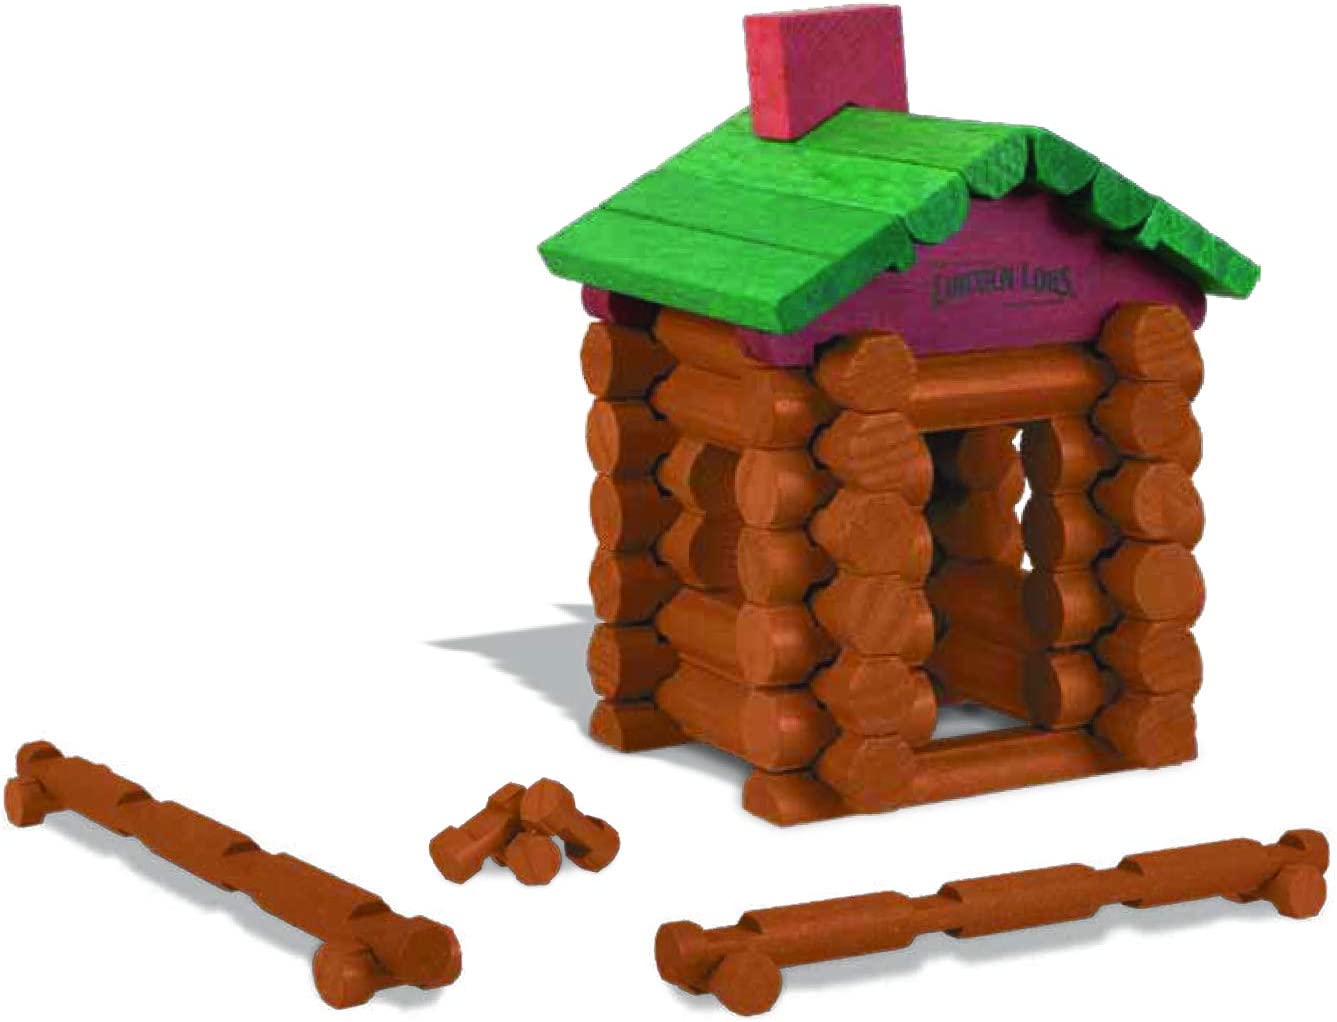 Toy World's Smallest Toy -  Lincoln Logs-hotRAGS.com